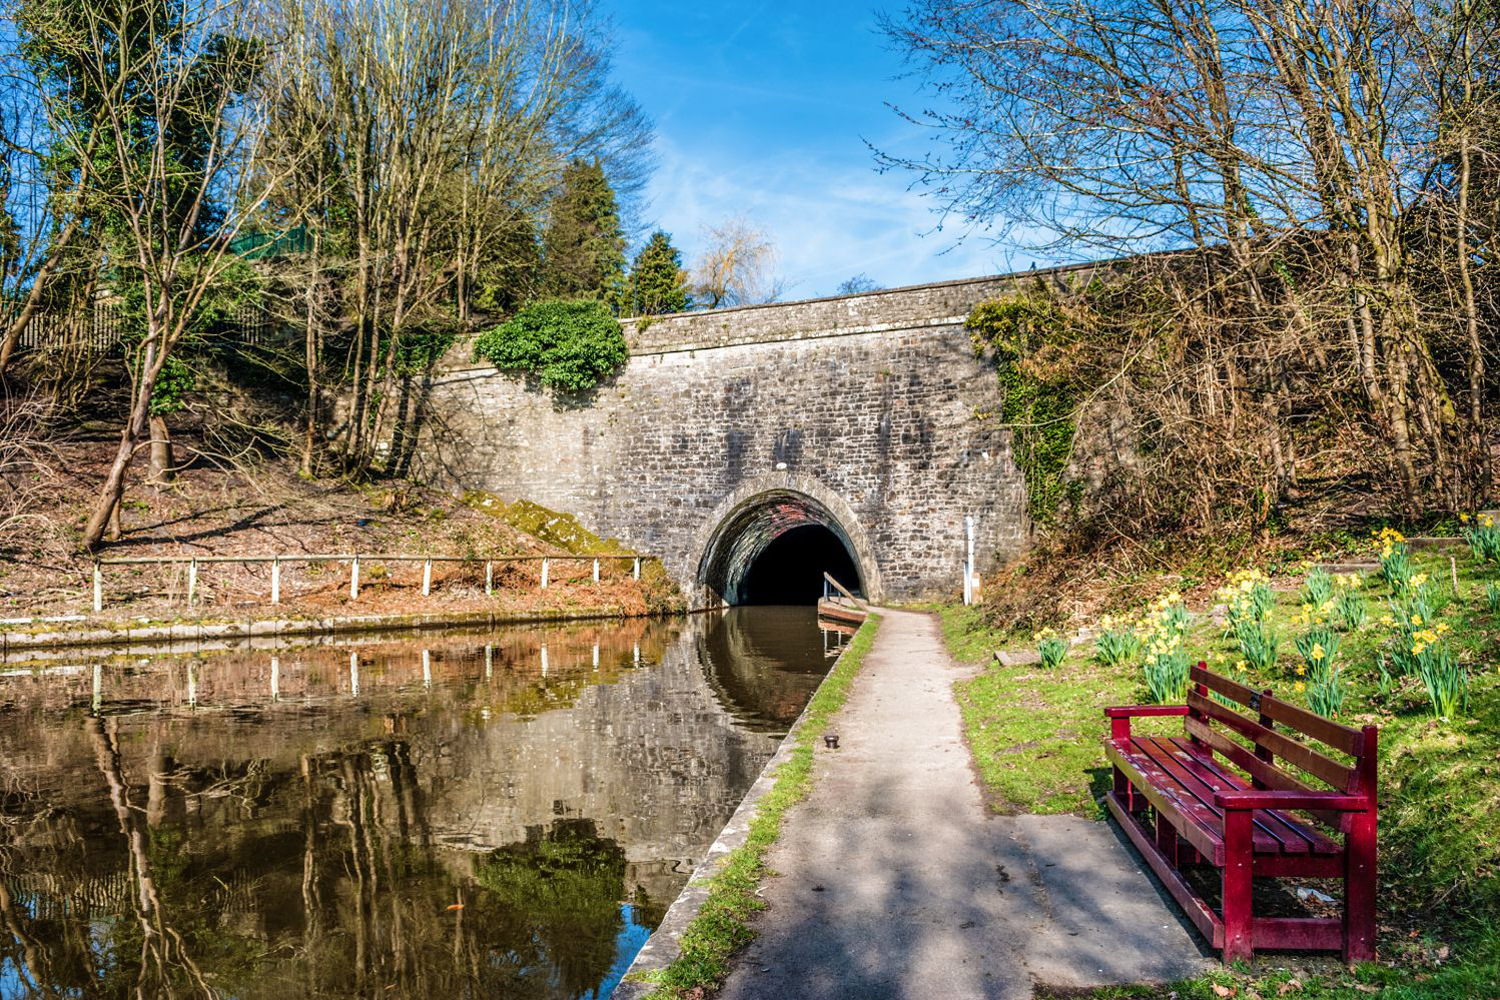 A tunnel entrance on part of the Llangollen canal in North Wales, with reflections in the still water.